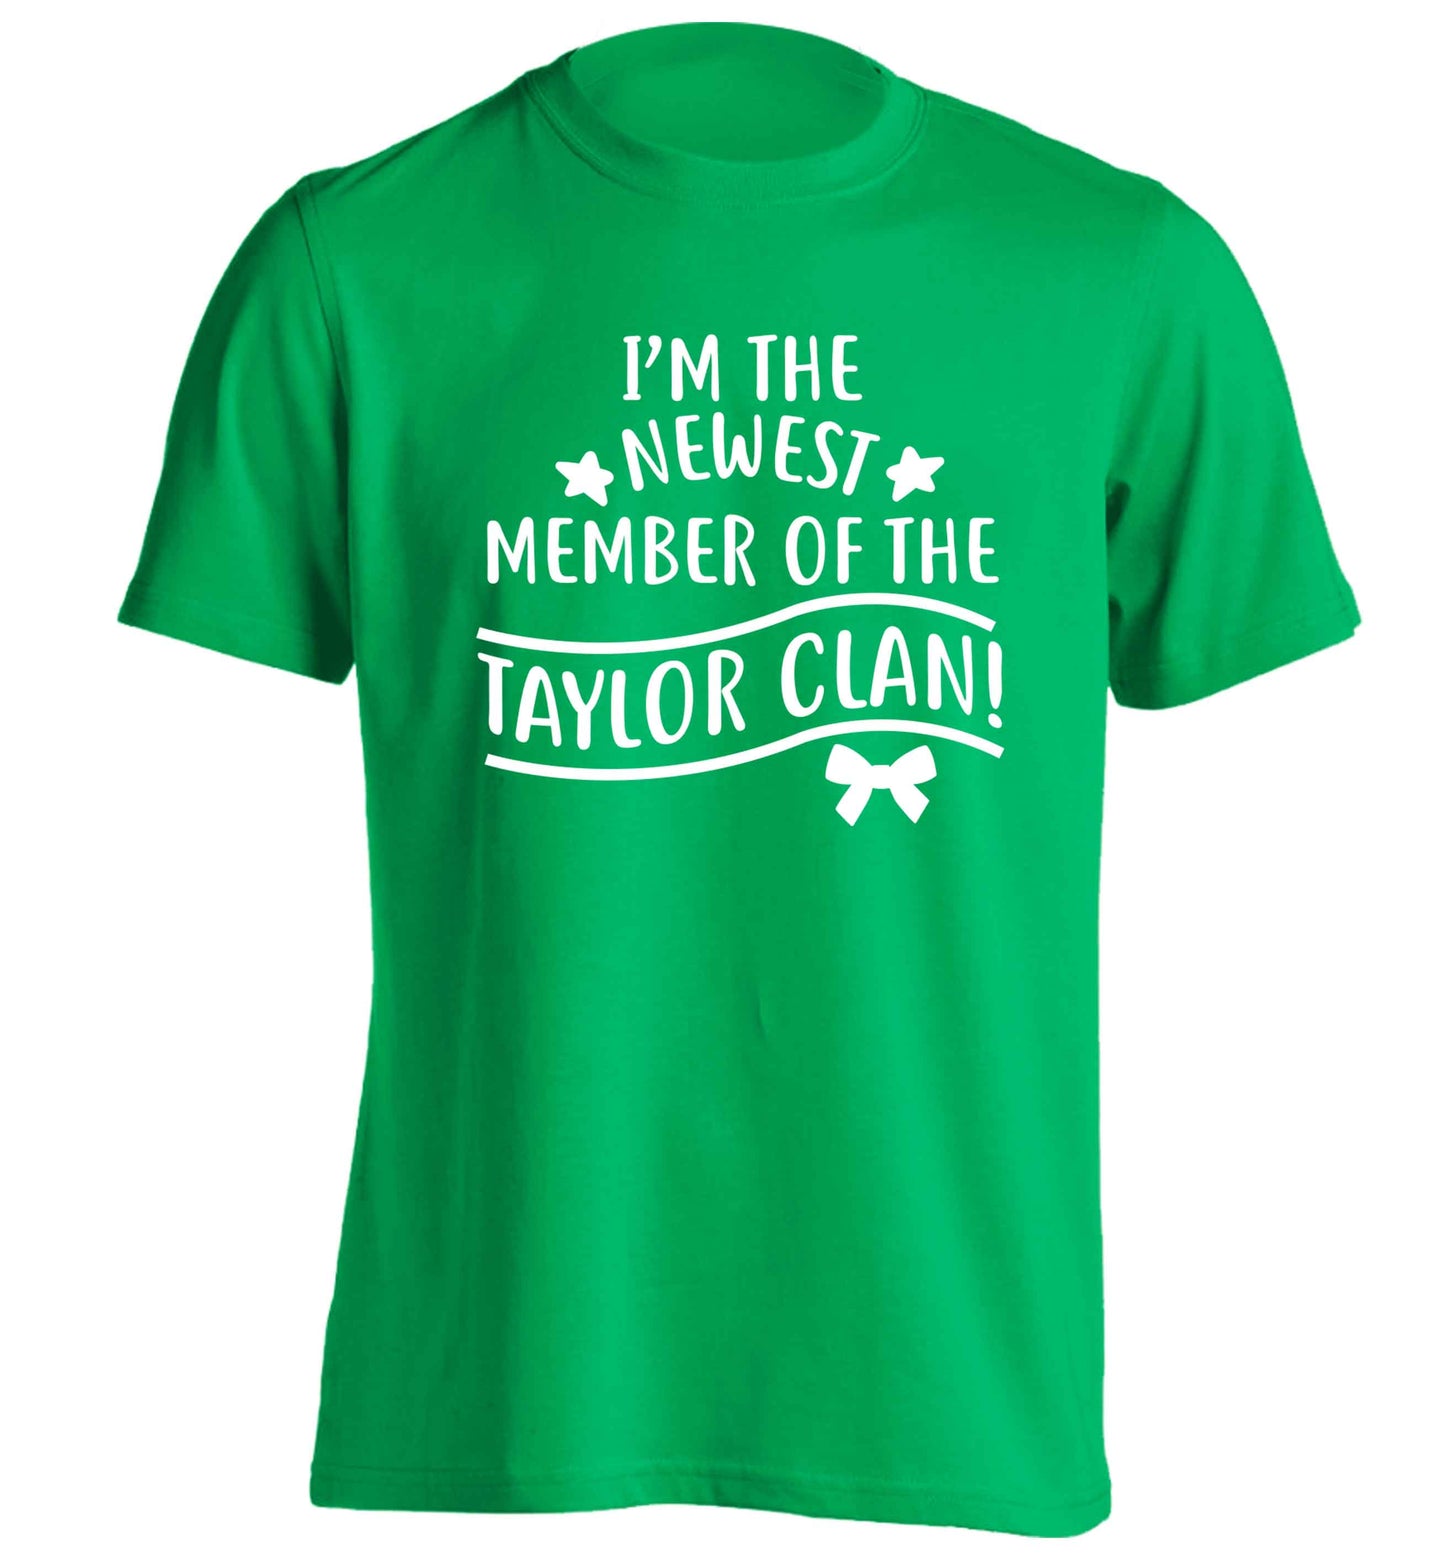 Personalised, newest member of the Taylor clan adults unisex green Tshirt 2XL